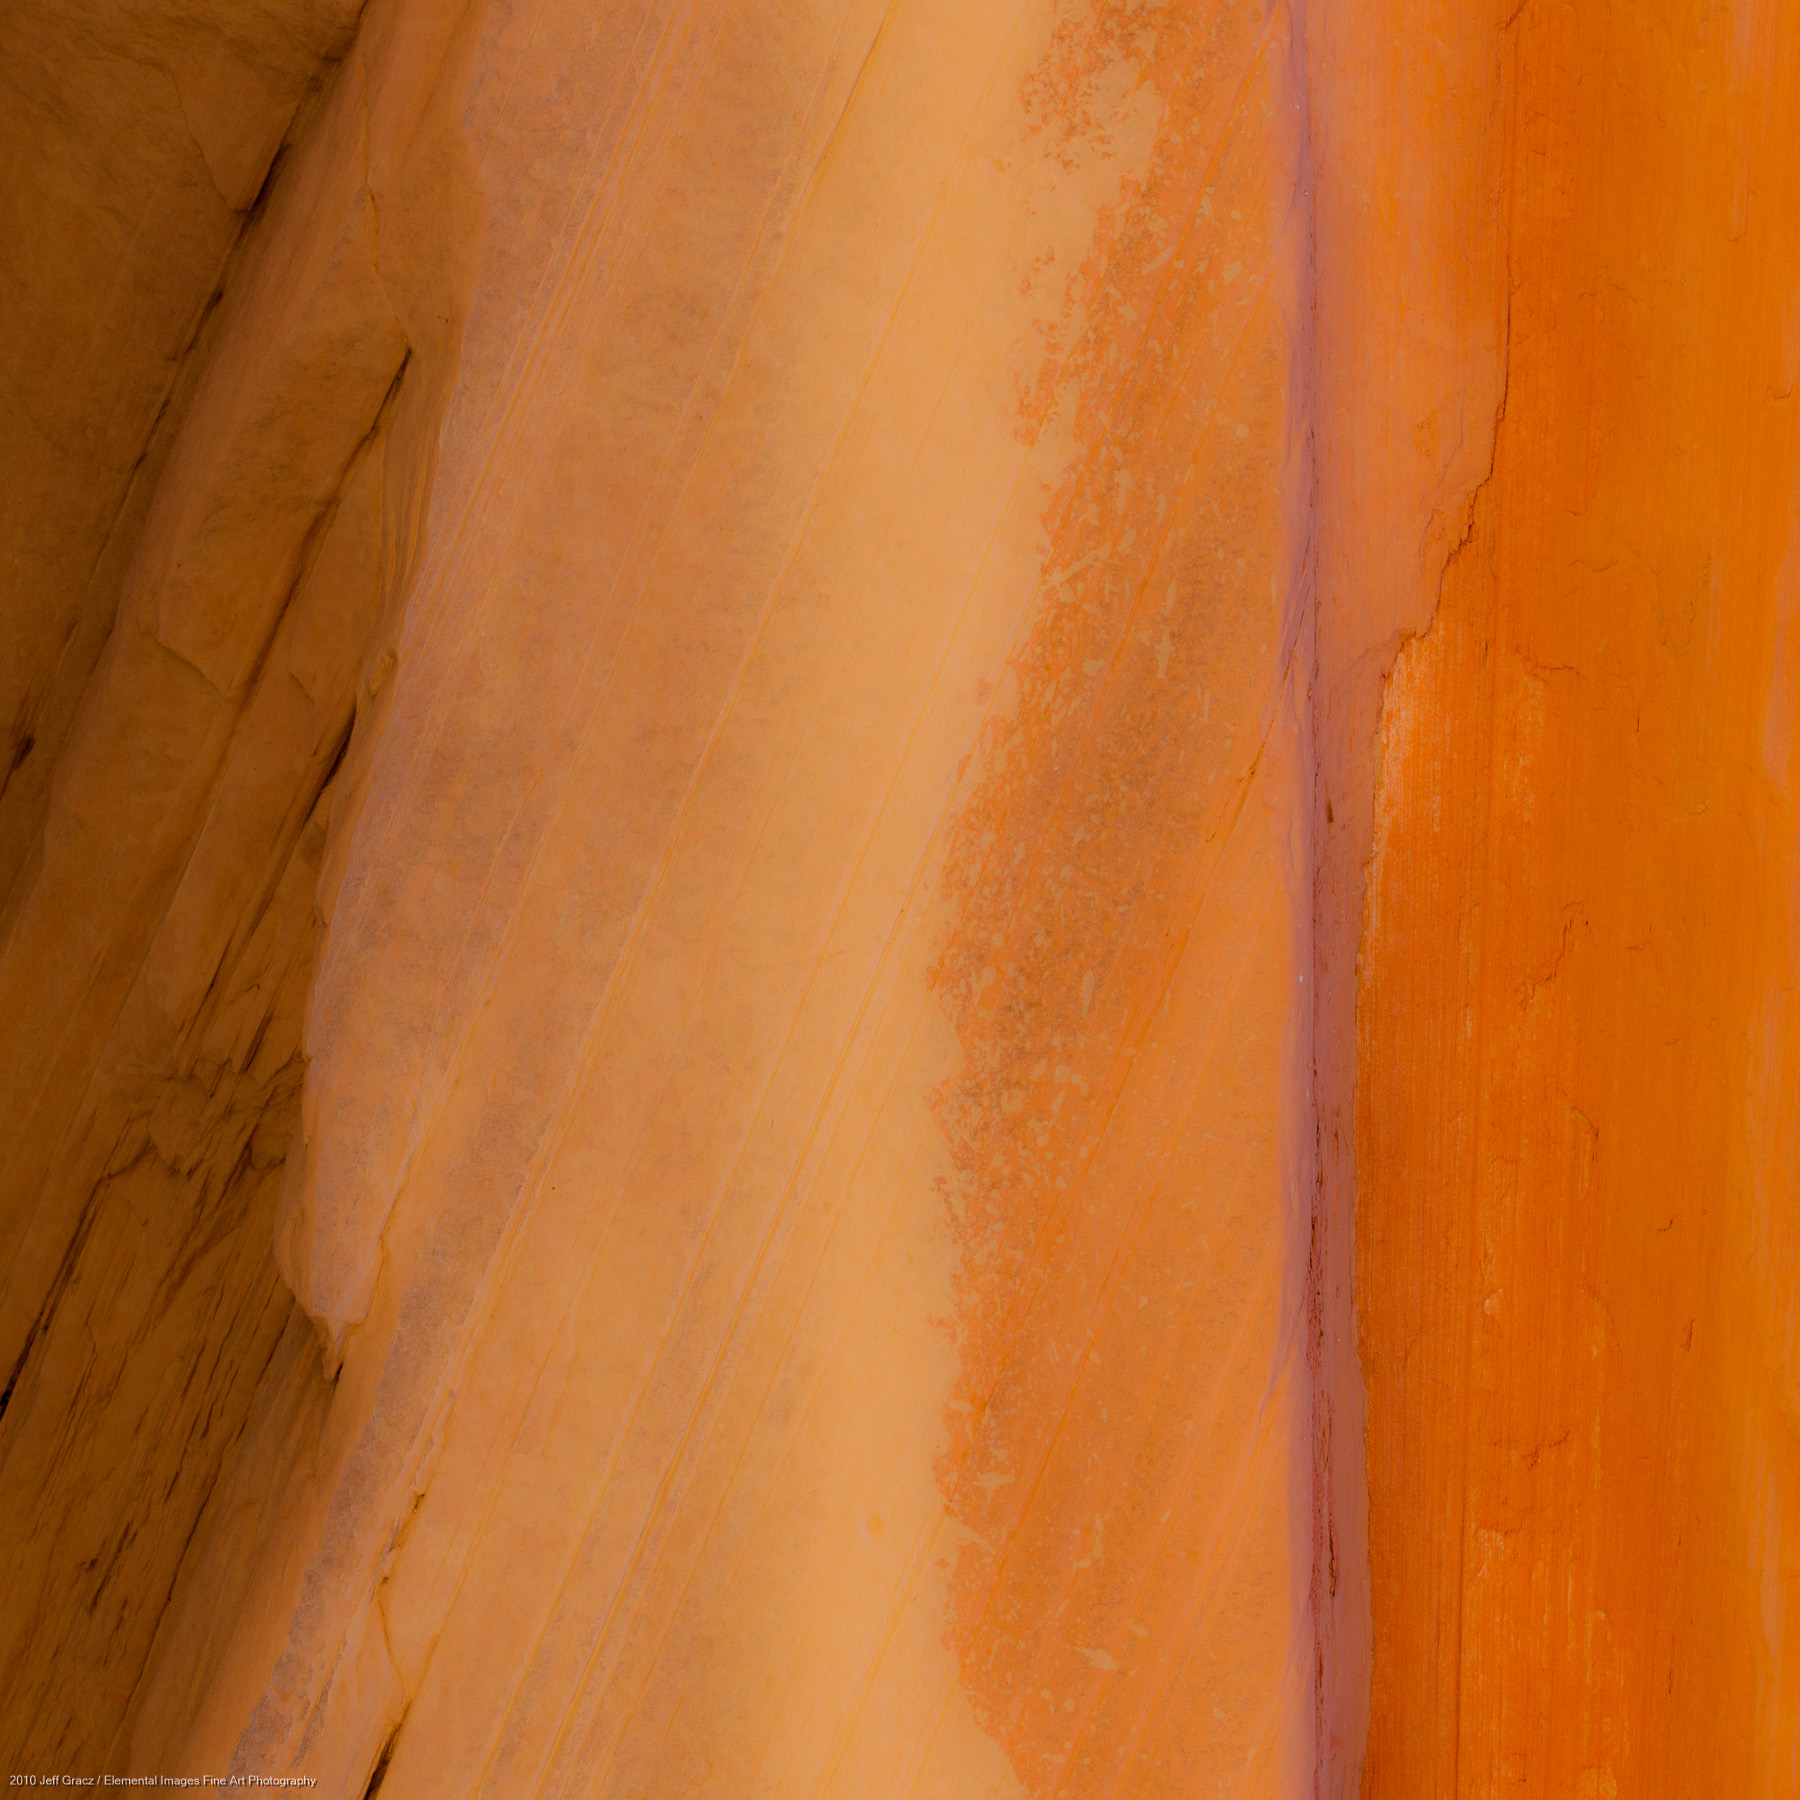 Canyon Wall Abstract II | Paria Canyon / Vermillion Cliffs Wilderness | AZ | USA - © 2010 Jeff Gracz / Elemental Images Fine Art Photography - All Rights Reserved Worldwide